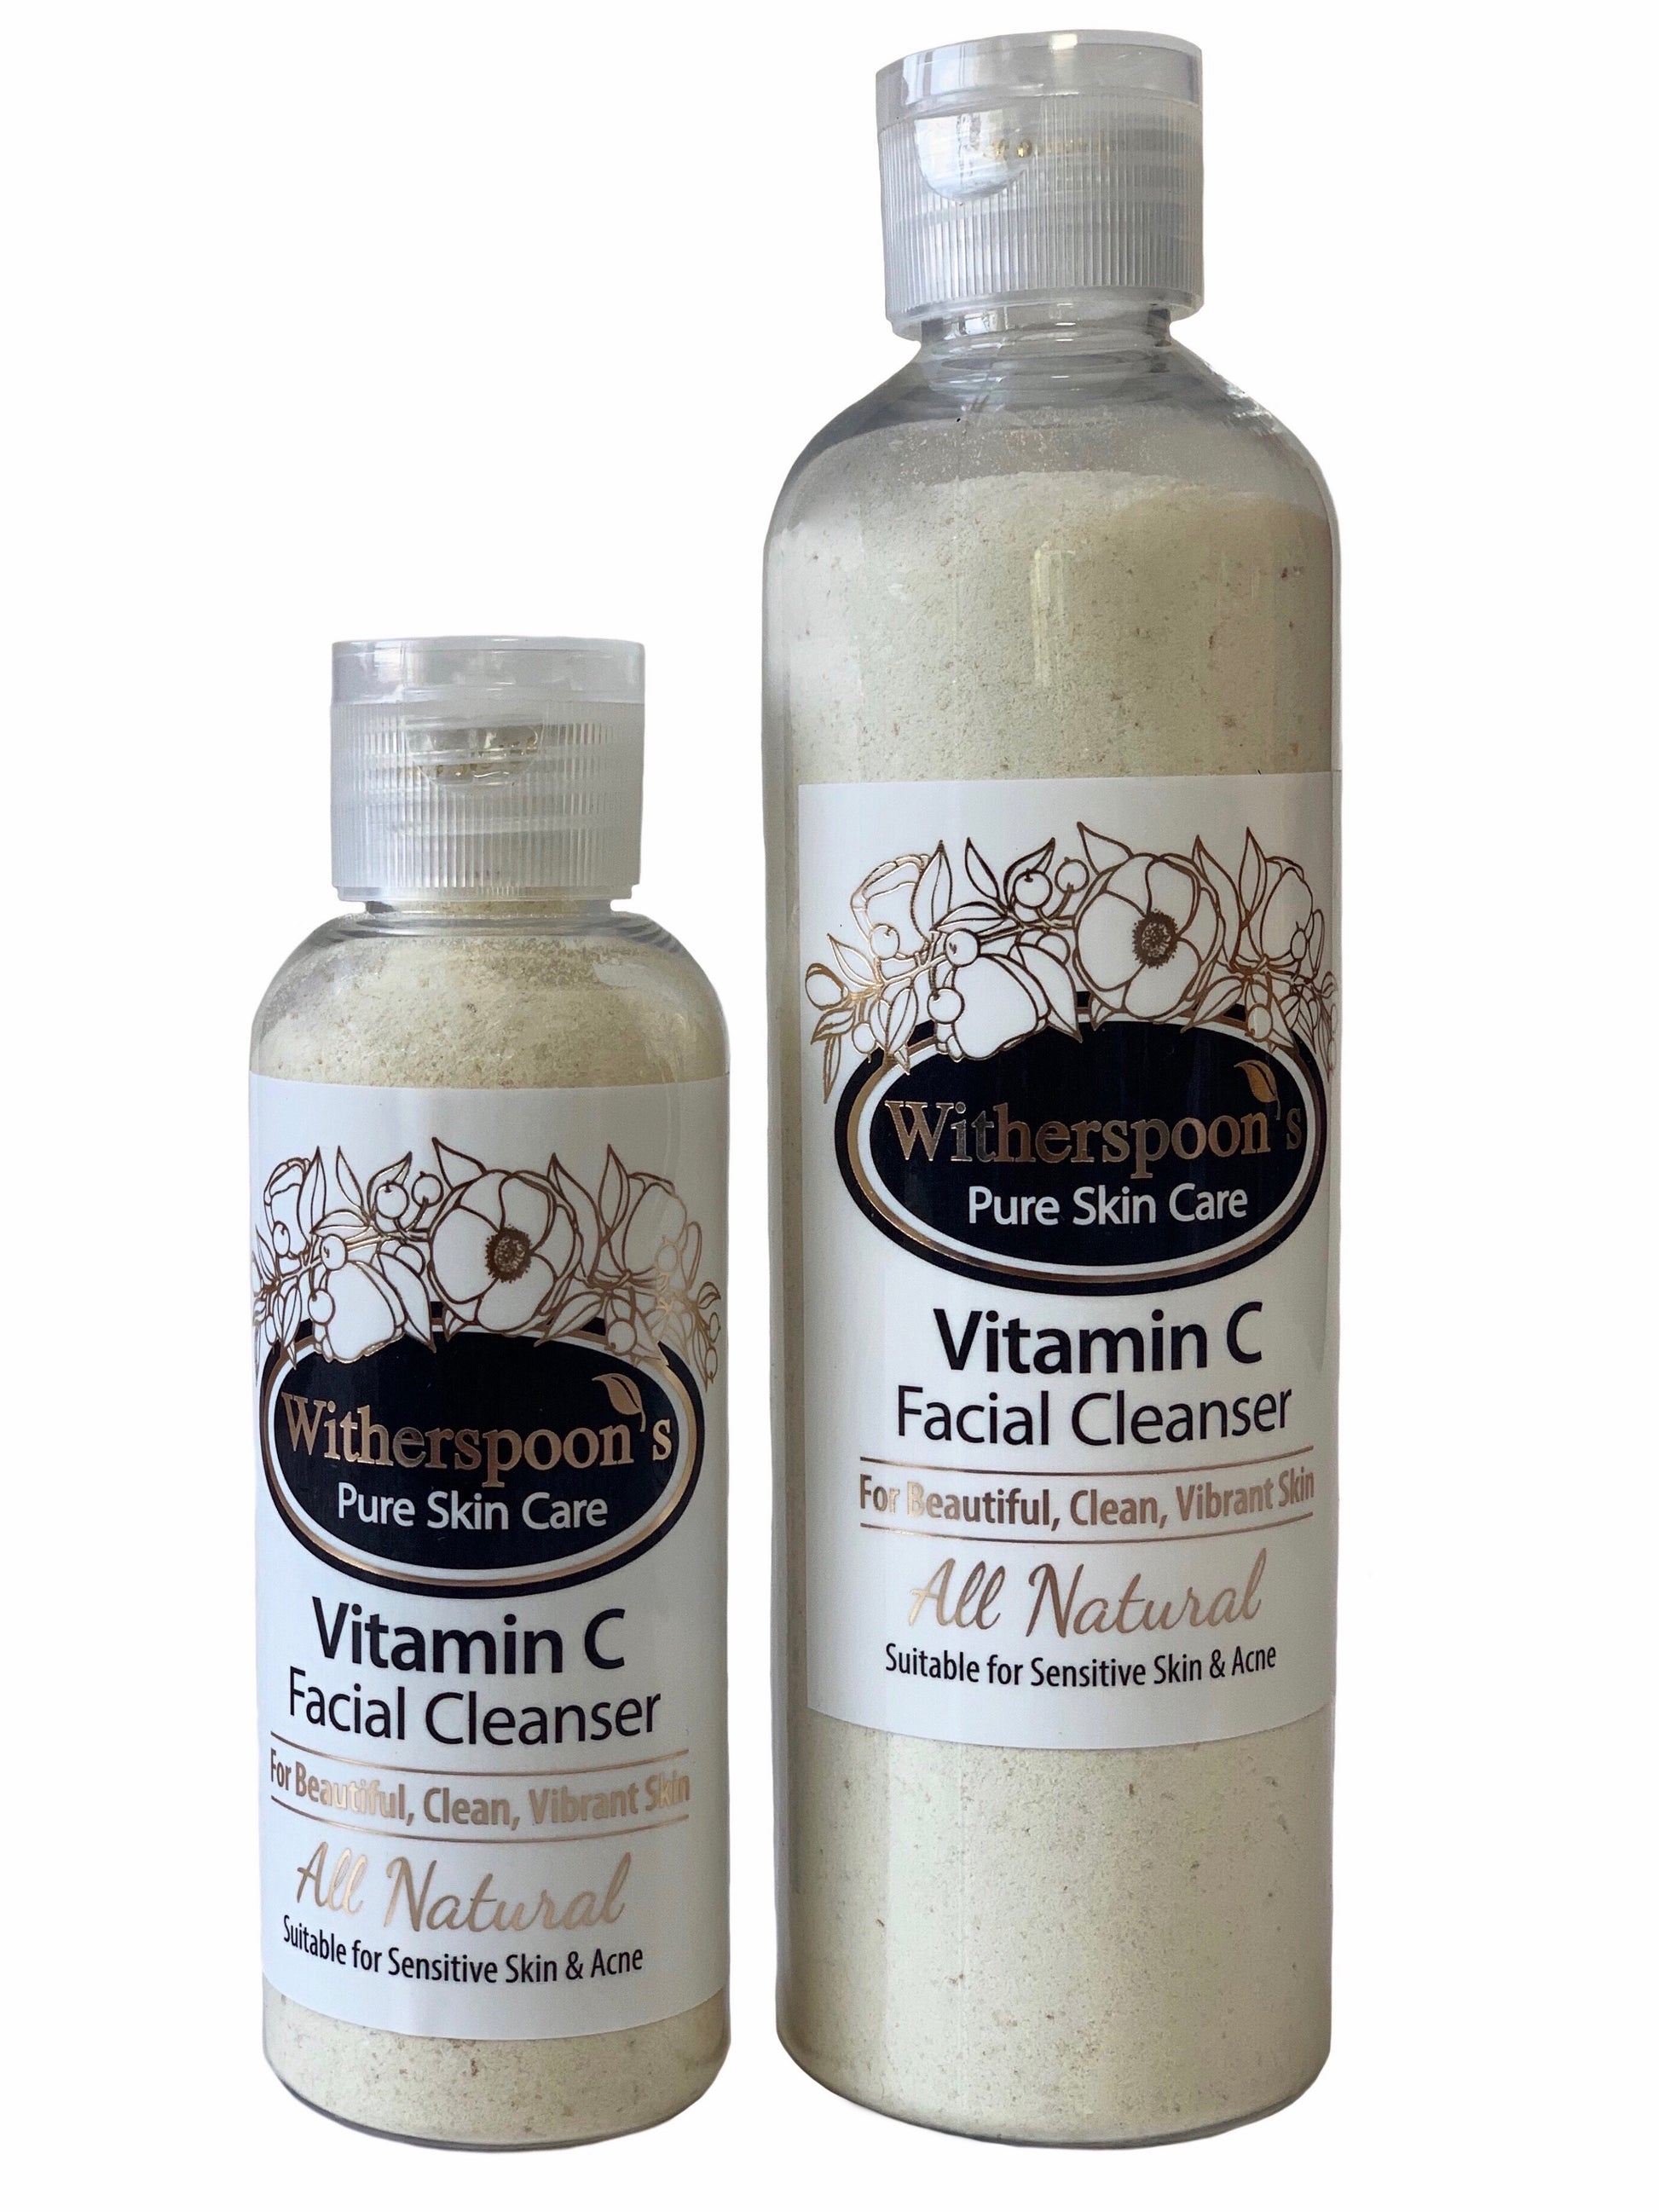 Vitamin C Facial Cleanser. A deep cleansing alternative with gentle exfoliation action to draw out impurities and condition the skin. . Comes in two sizes: 85g & 185g.